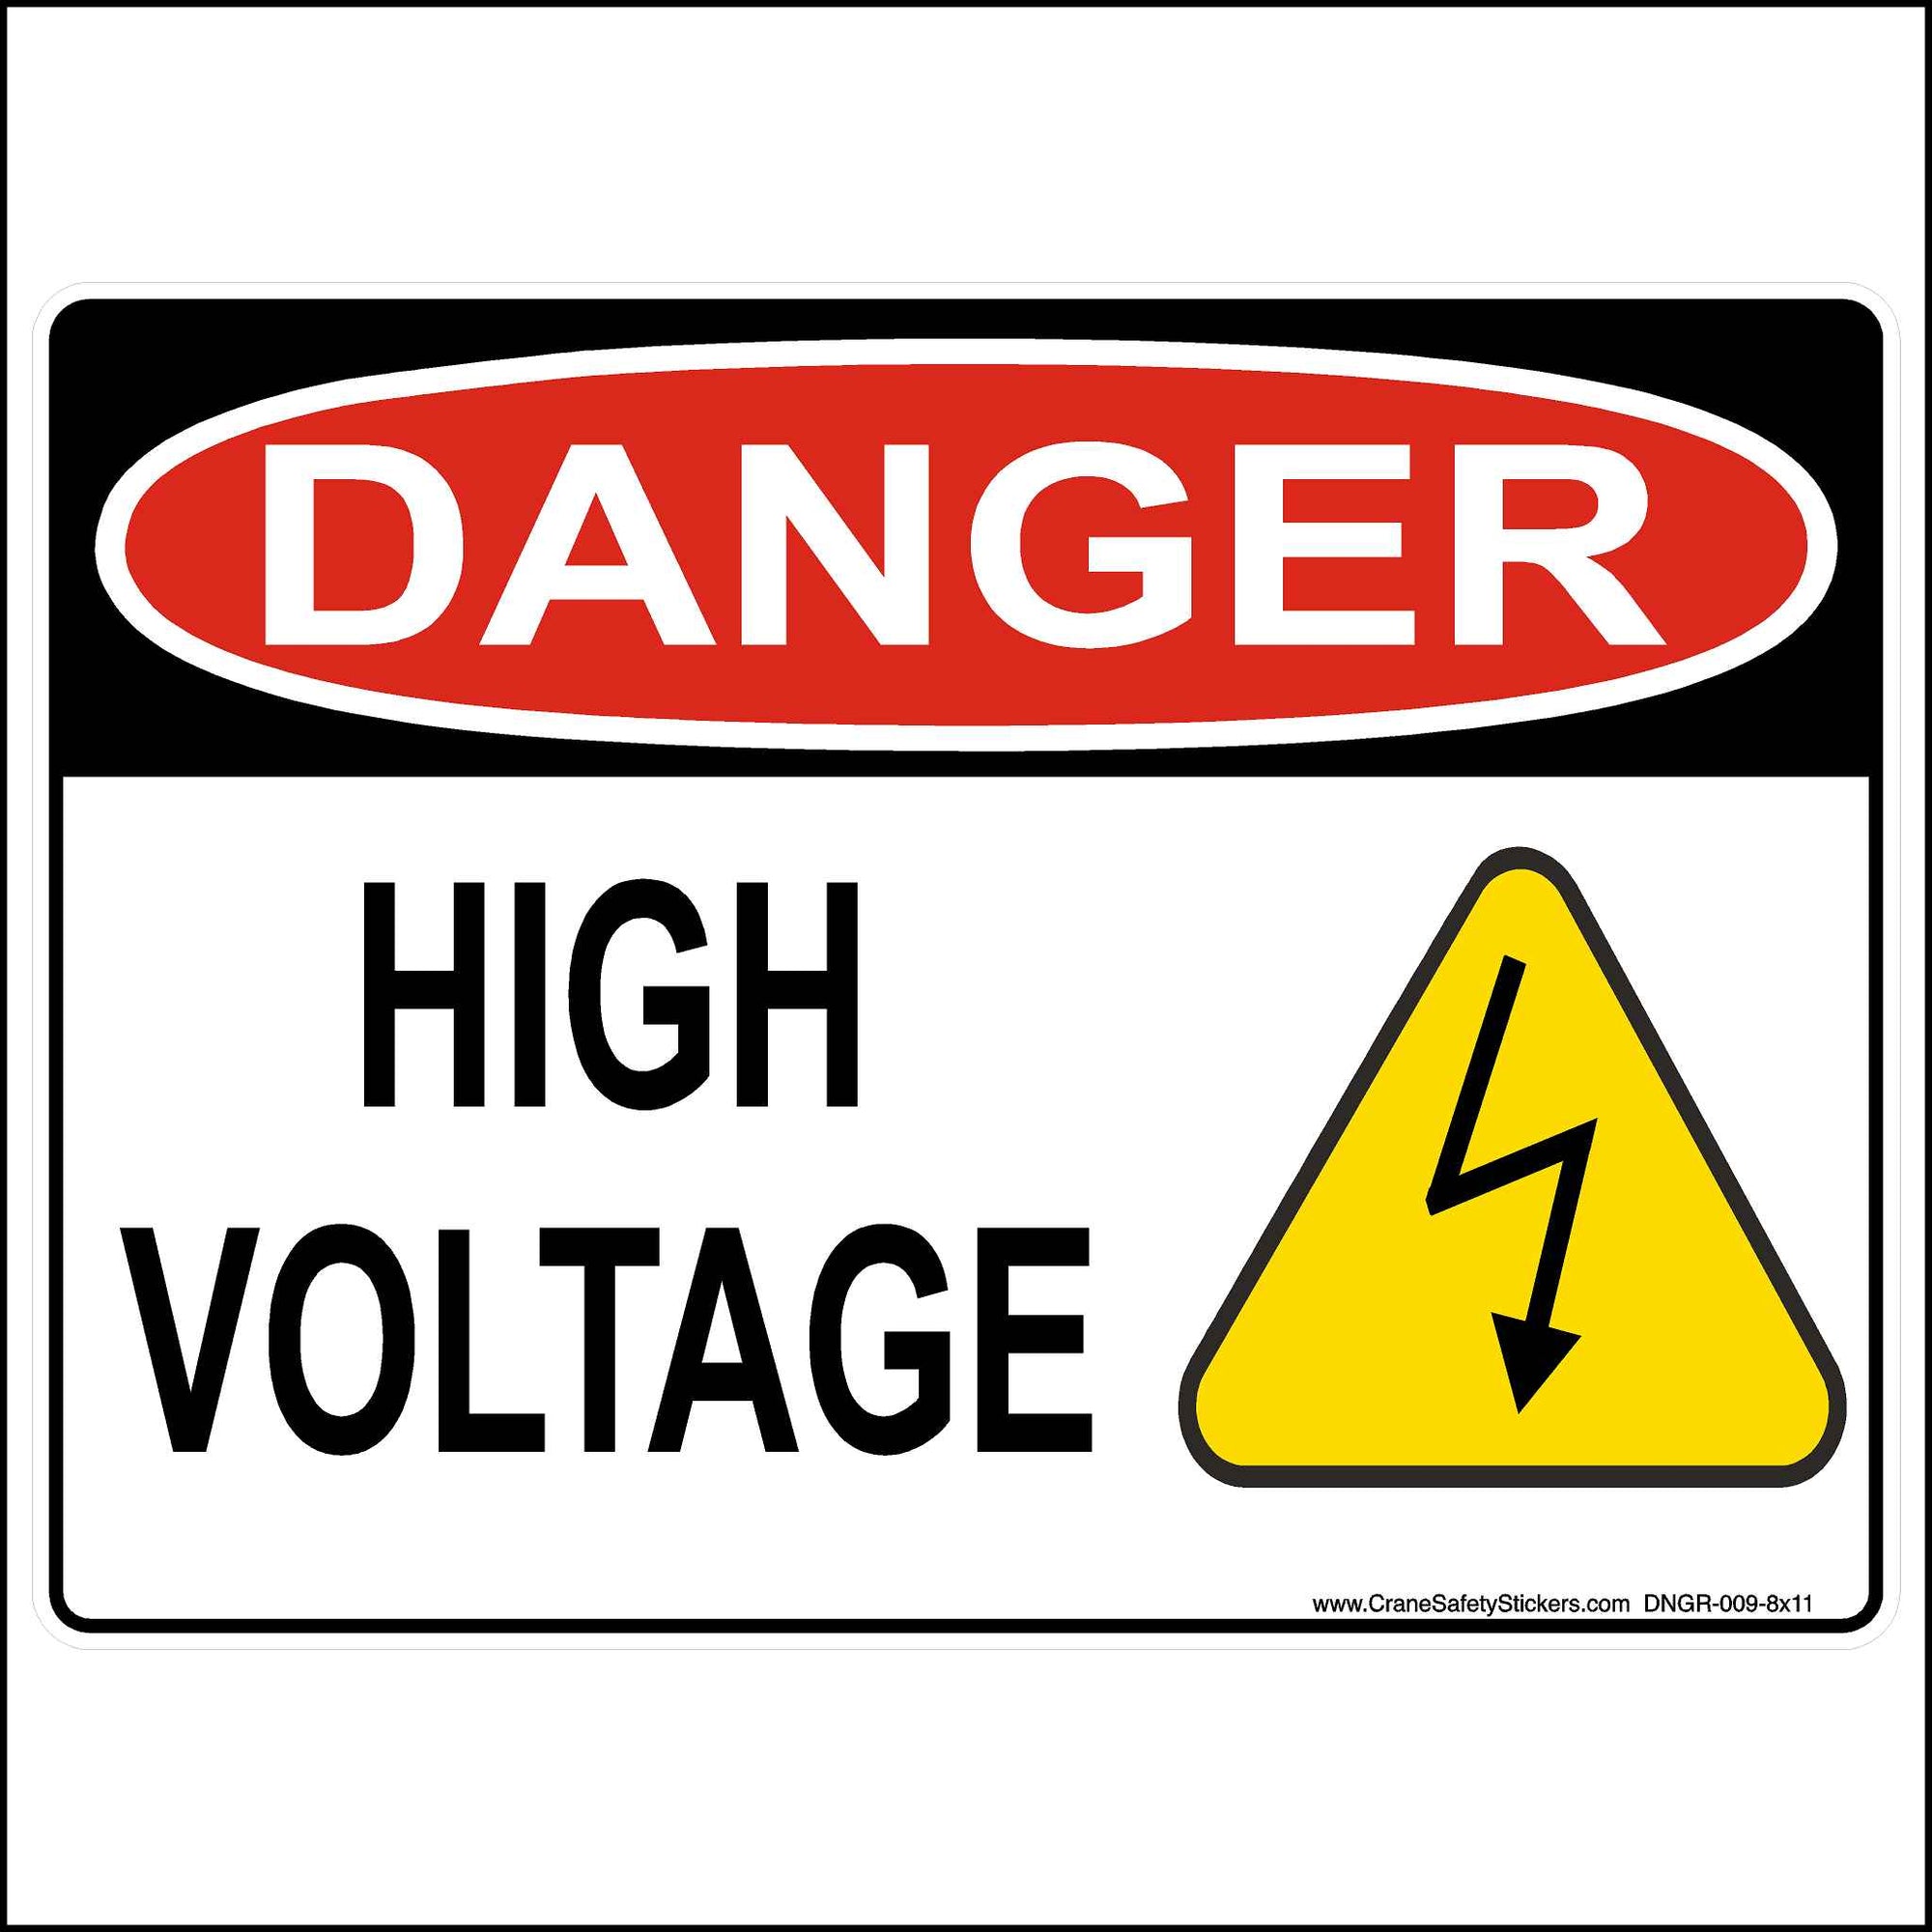 Danger sign printed with the osha danger symbol and the words high voltage and the caution high voltage symbol in yellow.